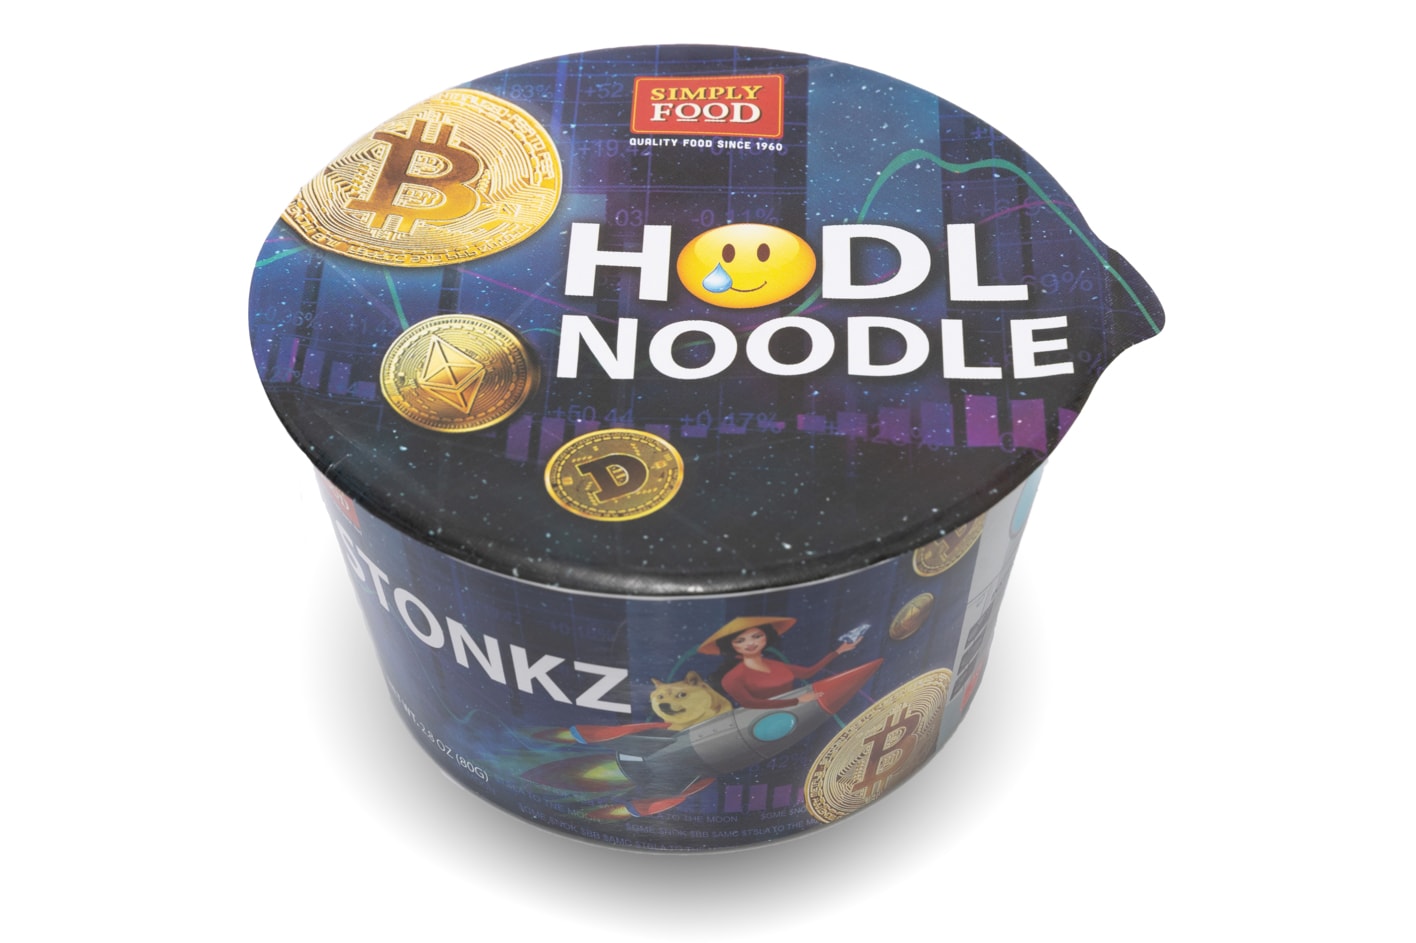 Simply Food HODL NOODLE LIMITED EDITION instant ramen safemoon doge coin instant noodles Binh Tay Food Company cryptocurrency humor 